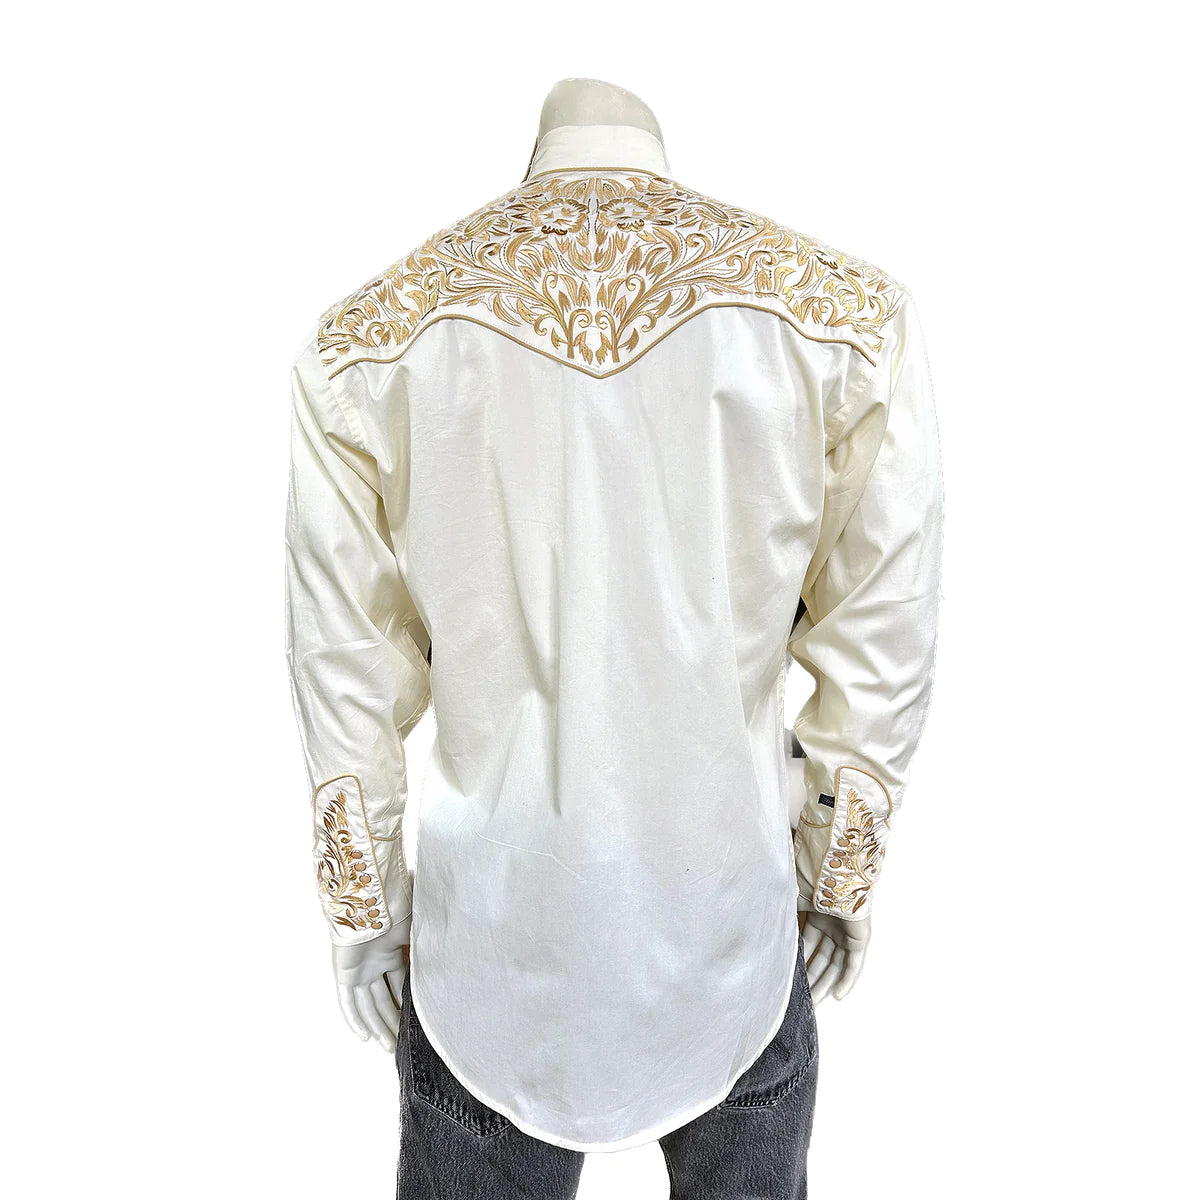 Rockmount Ranch Wear Men's Tone on Tone Embroidery Ivory Gold Back #176859